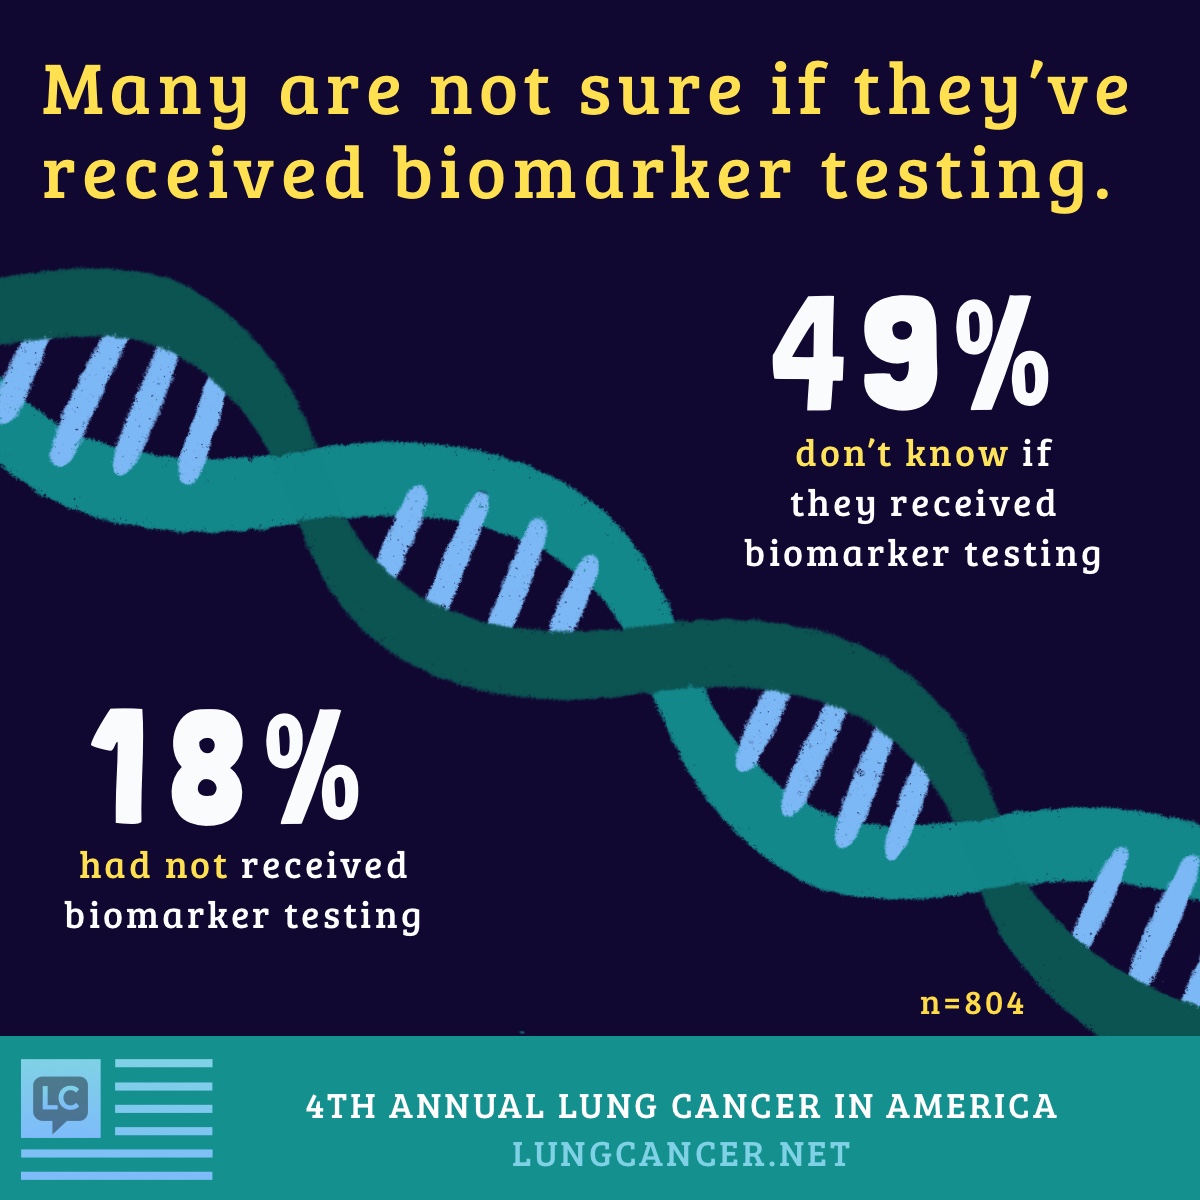 People are not always sure if they’ve received biomarker testing with 49% unsure and 18% who did not receive biomarker testing.